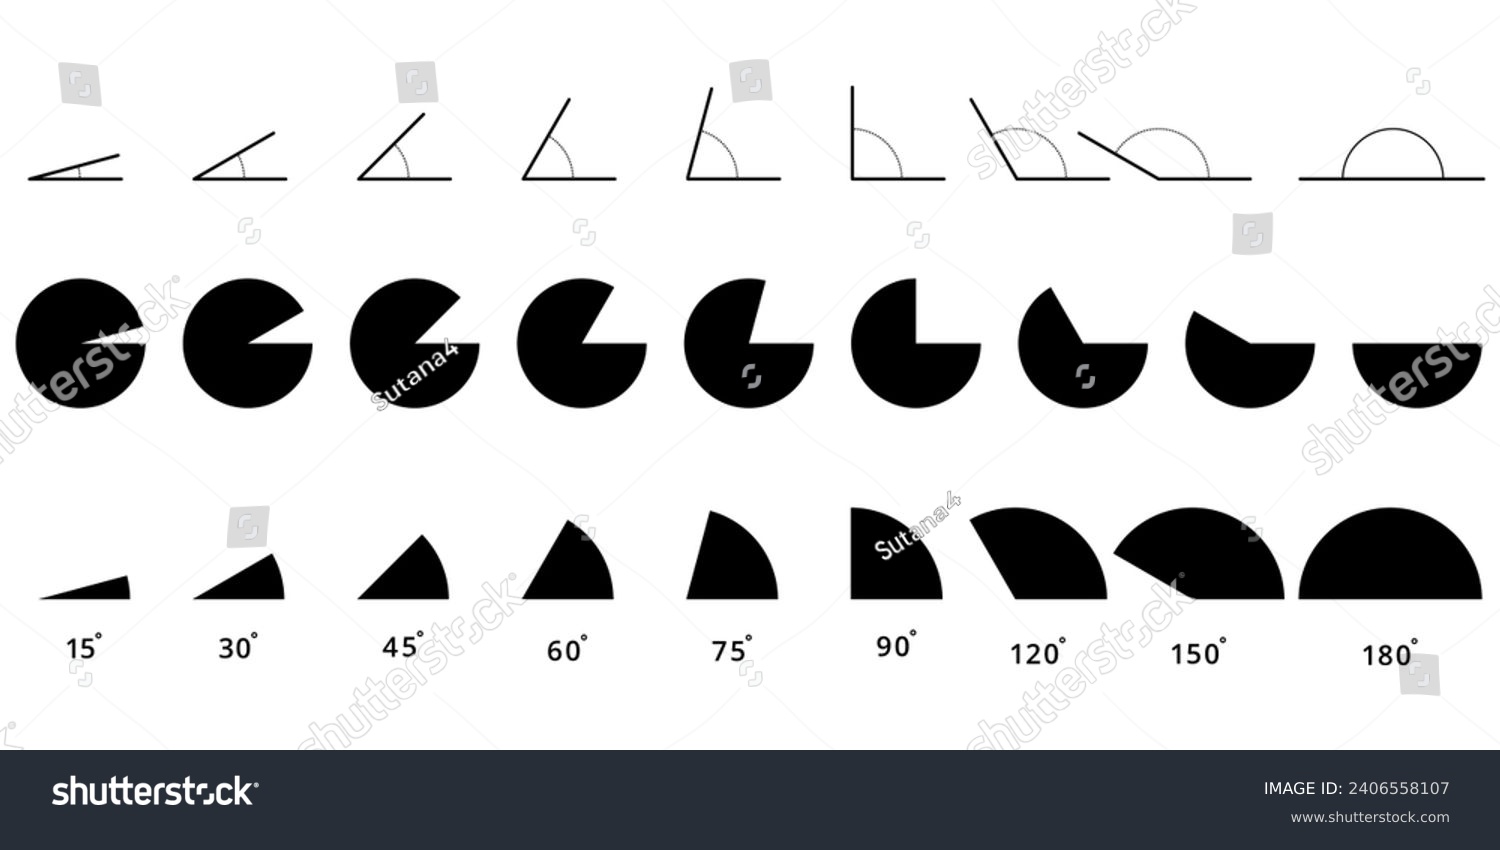 SVG of 15,30,45,60,75,90,120,150,180 degree icon set.degree of arc and pie chart icon svg